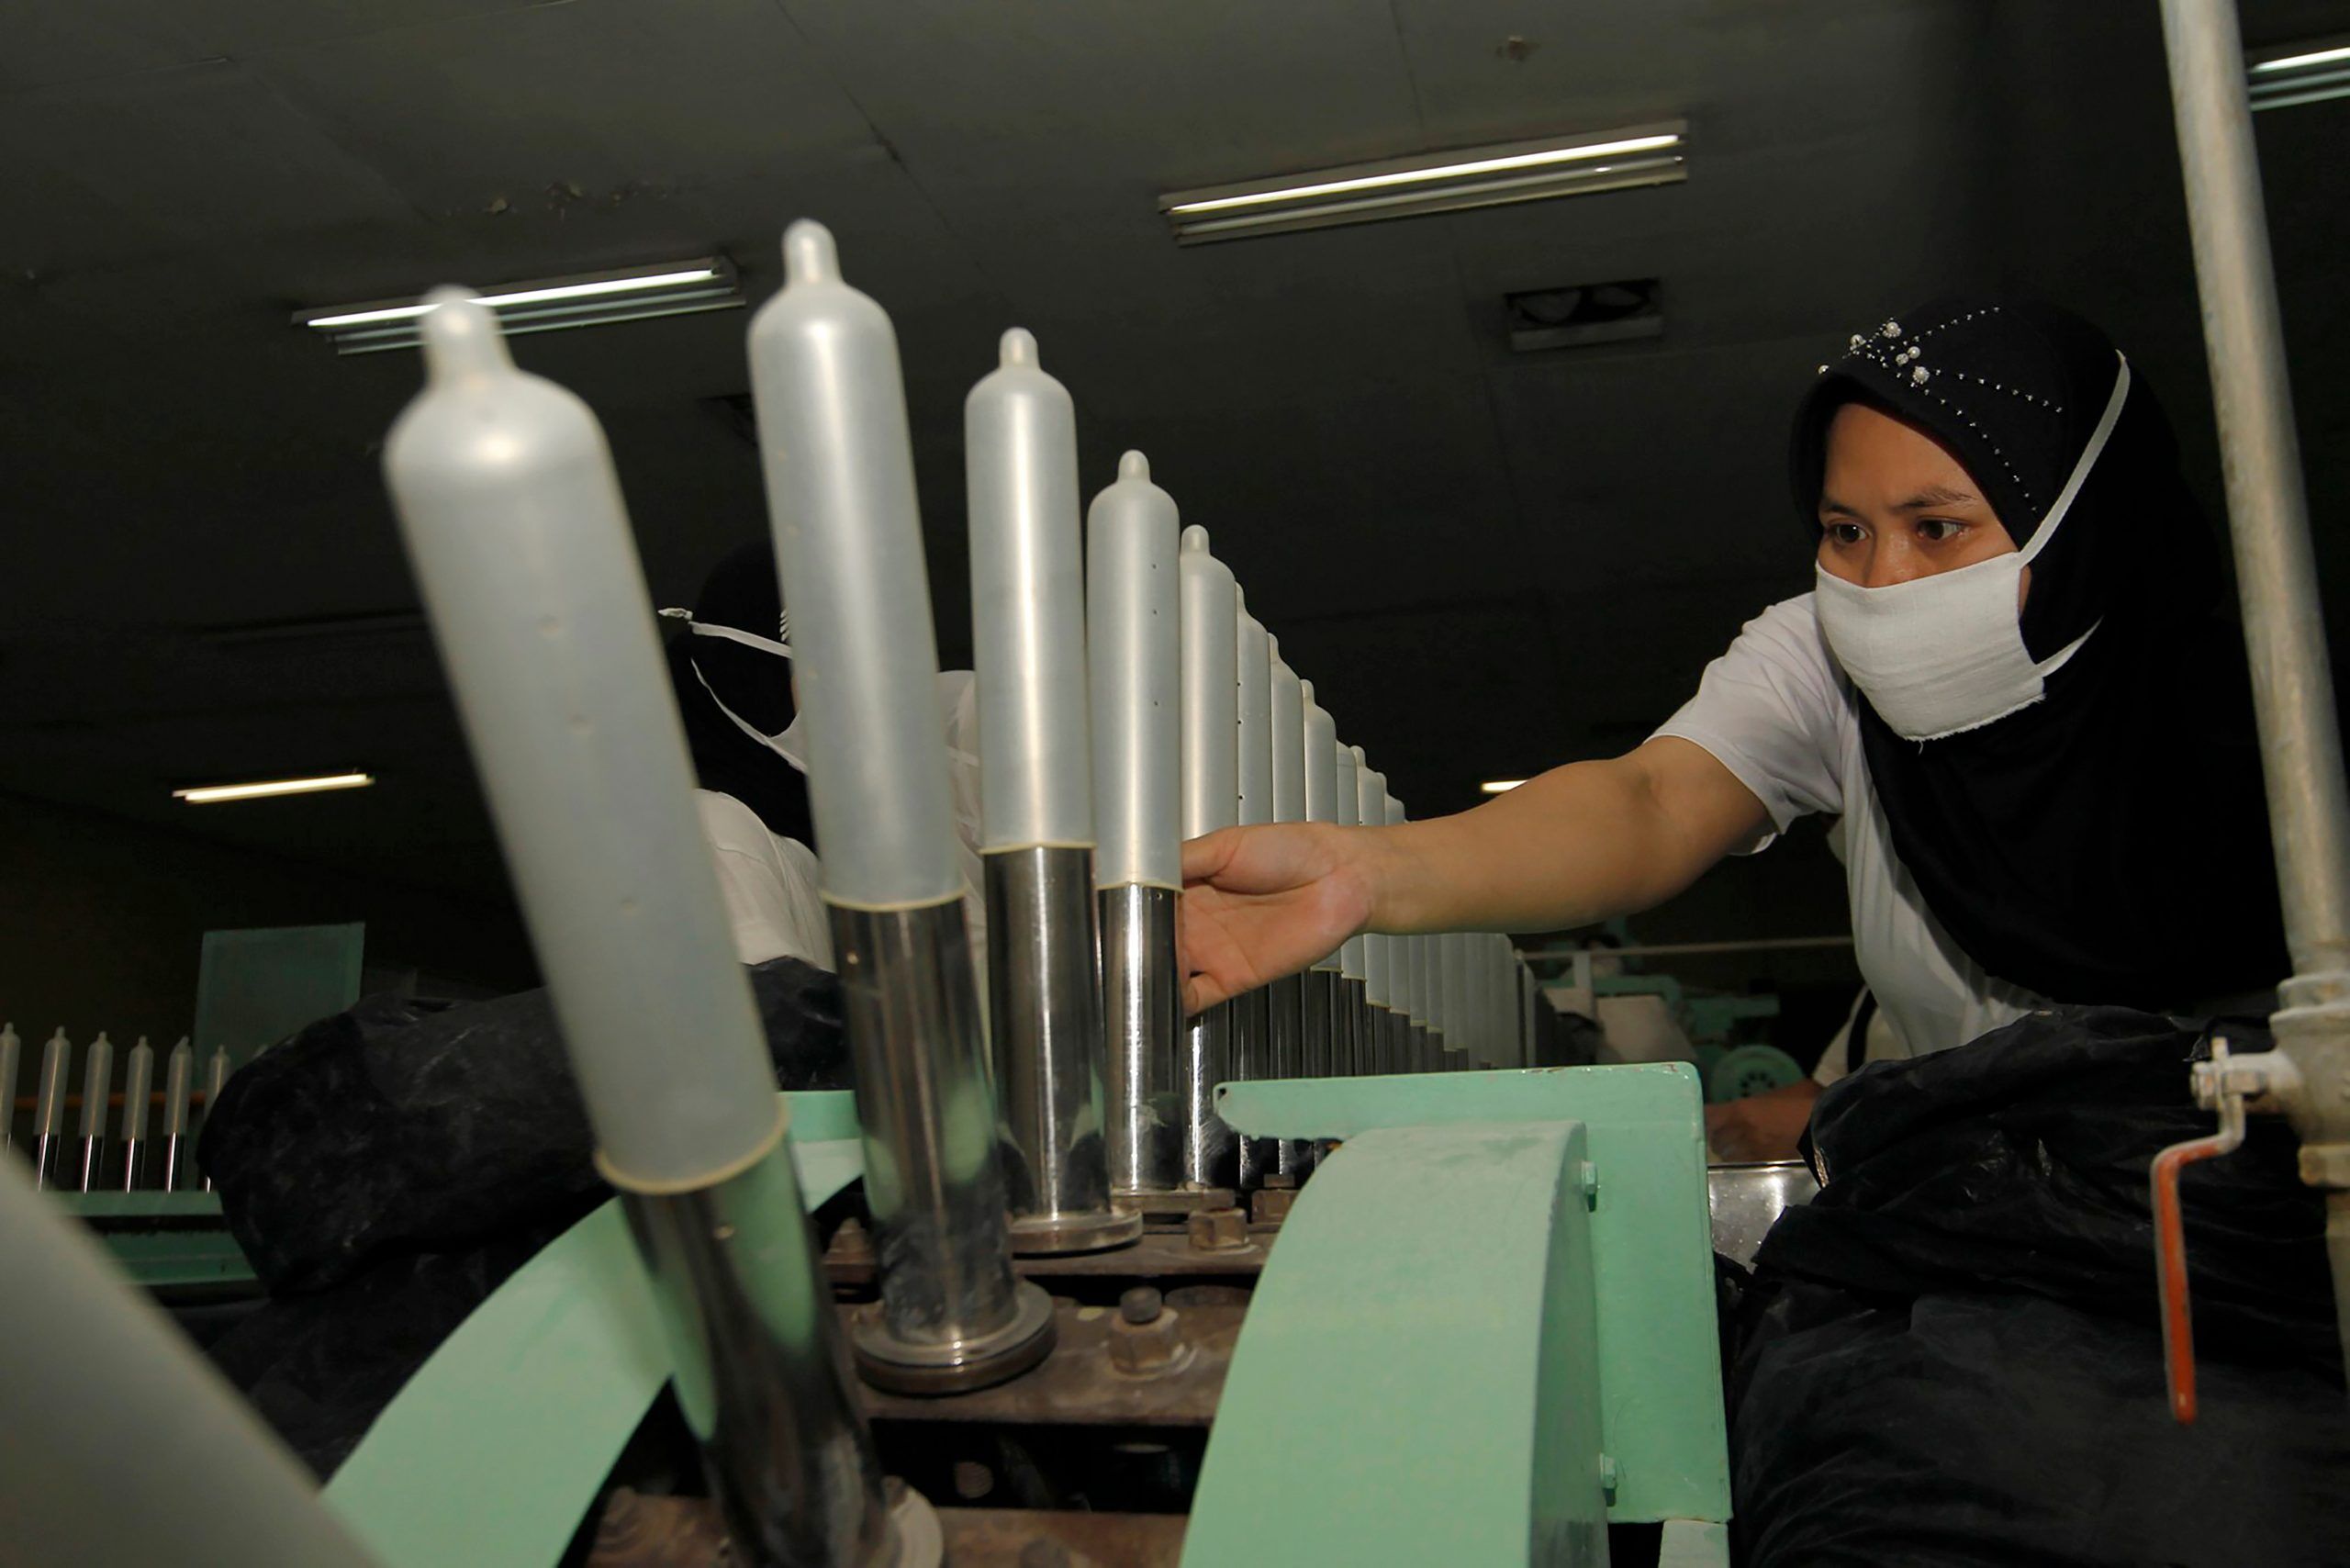 A worker inspects finished condoms at a factory in Bandung, Indonesia.